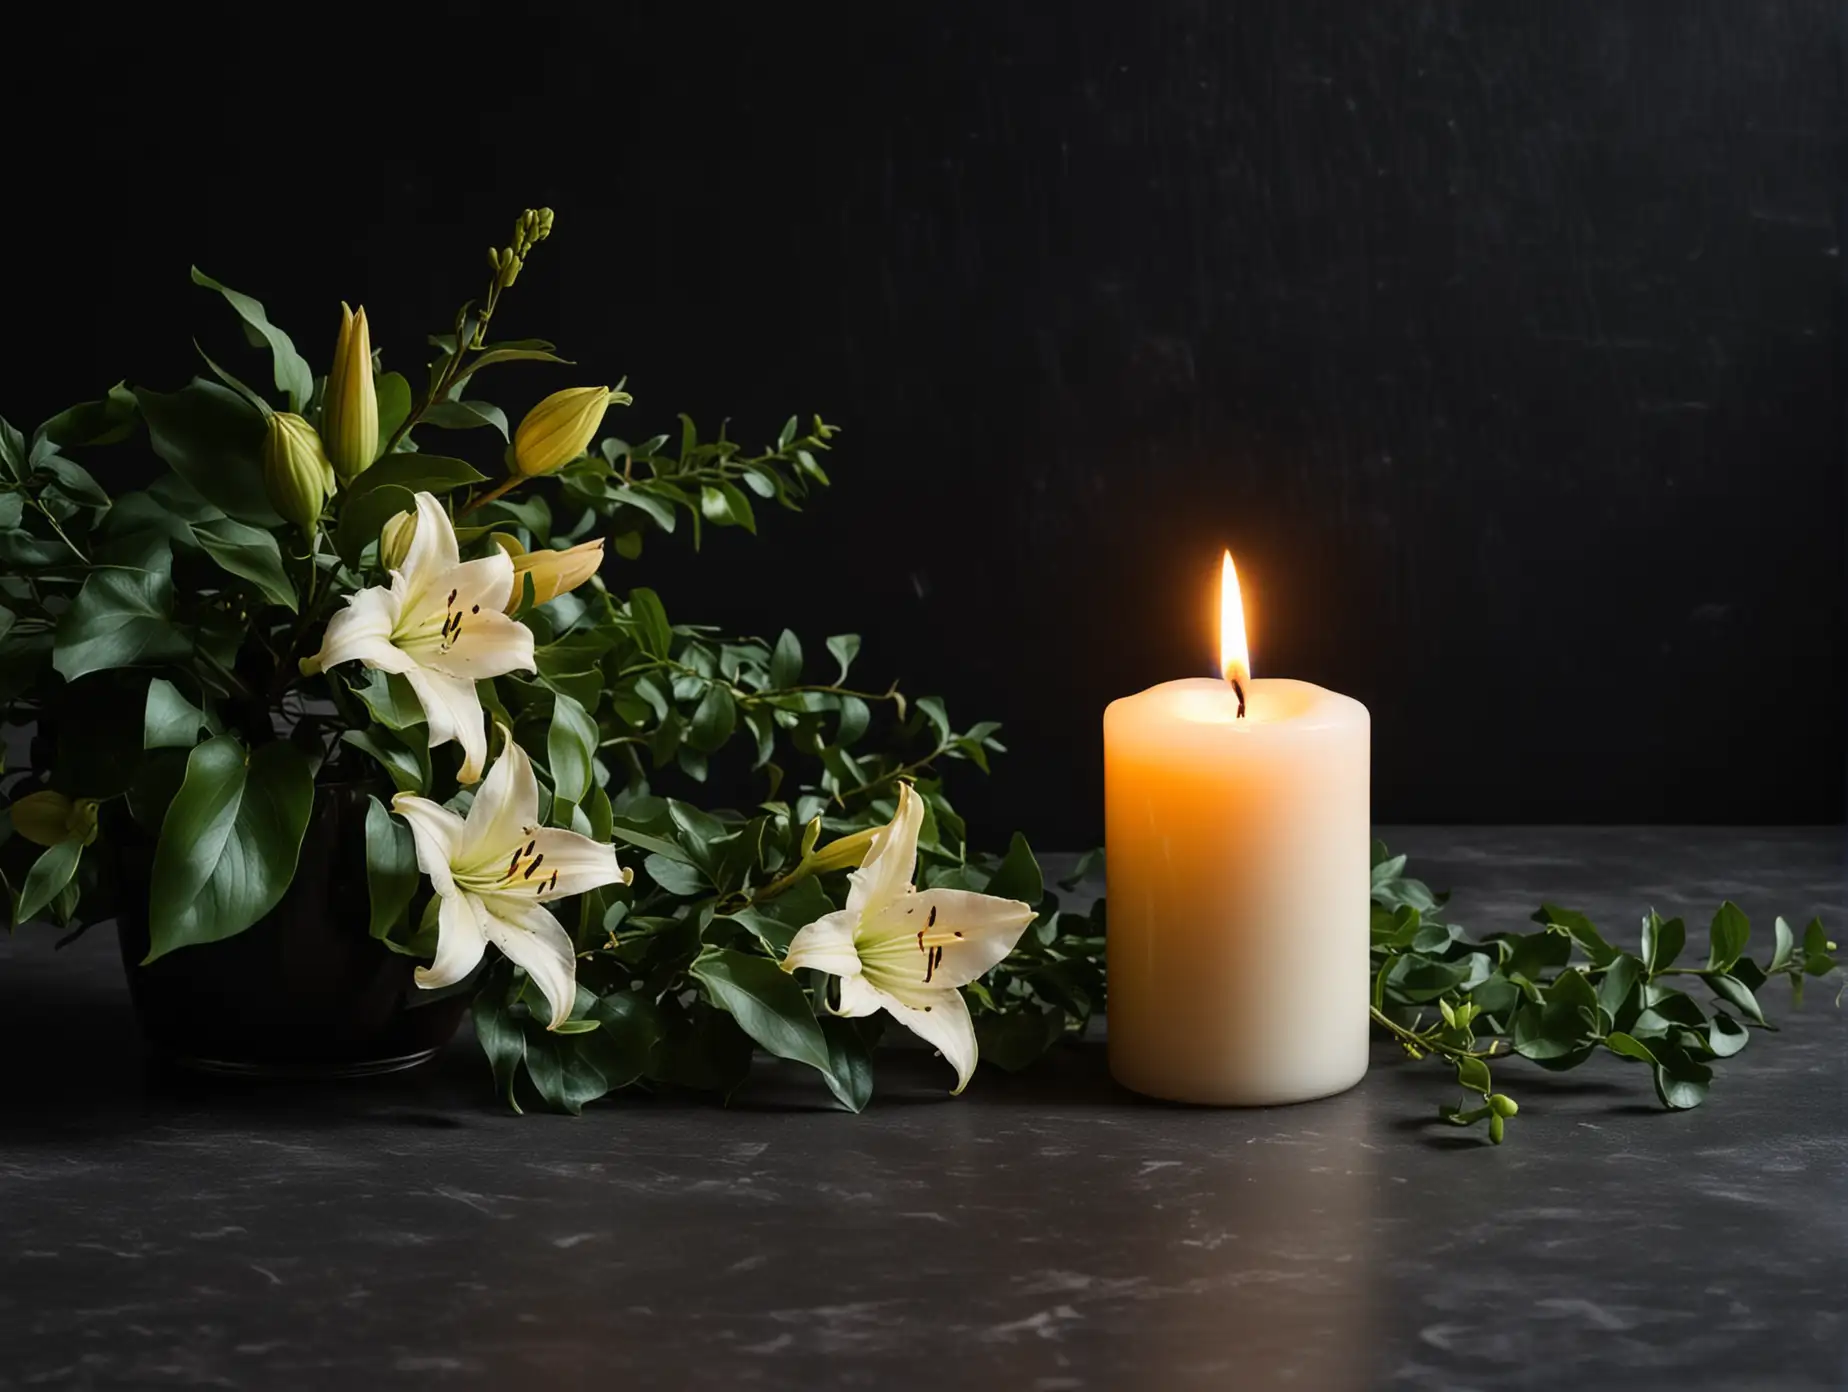 Candlelight Illuminating Lilies and Ivy on Dark Table